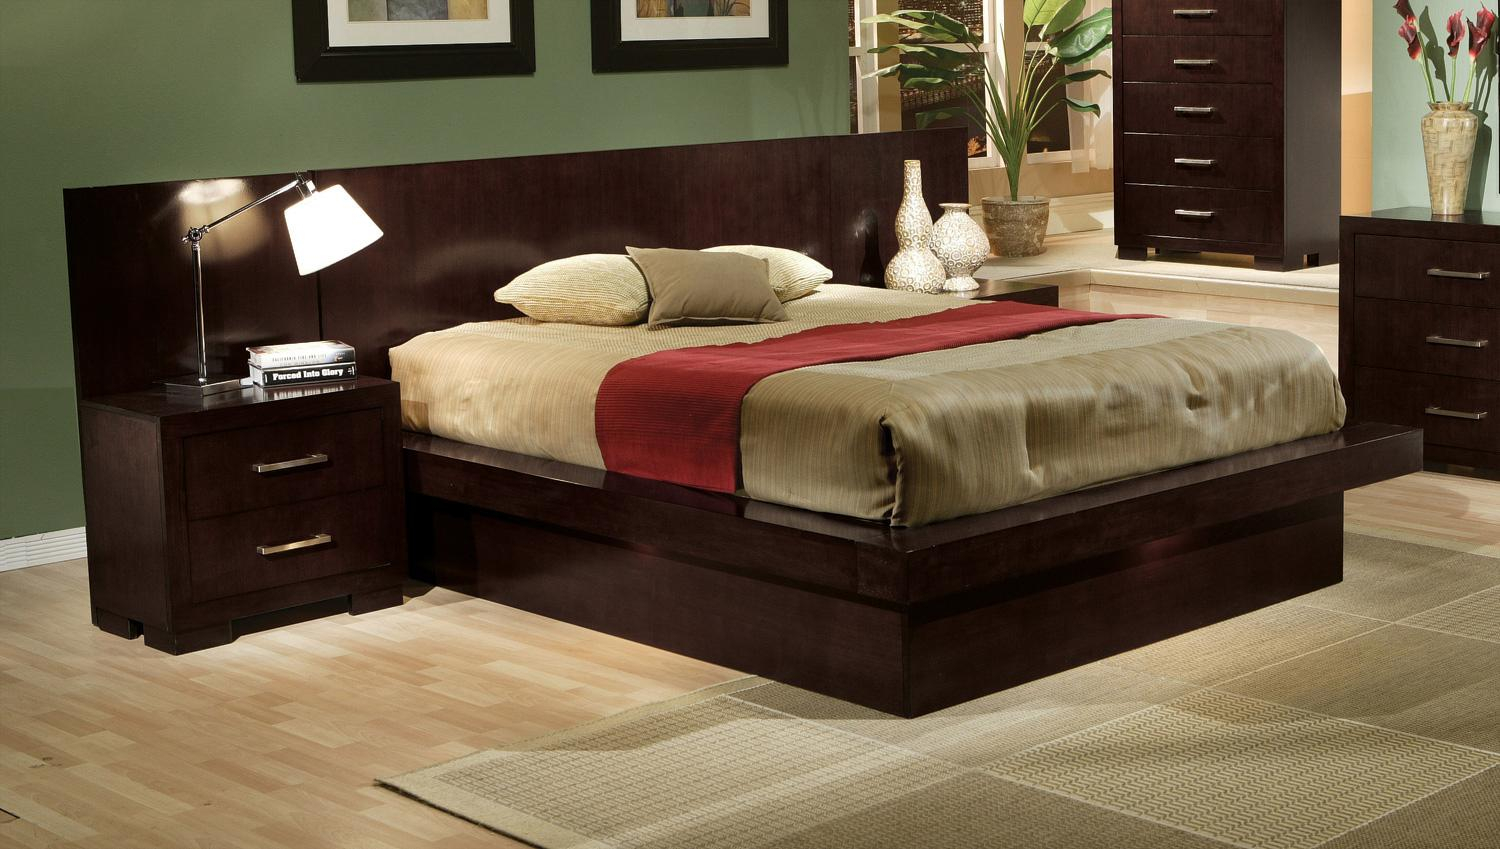 Modern 4 Pc Platform Bed Queen Bedroom Fairfax Va Furniture intended for sizing 1500 X 849